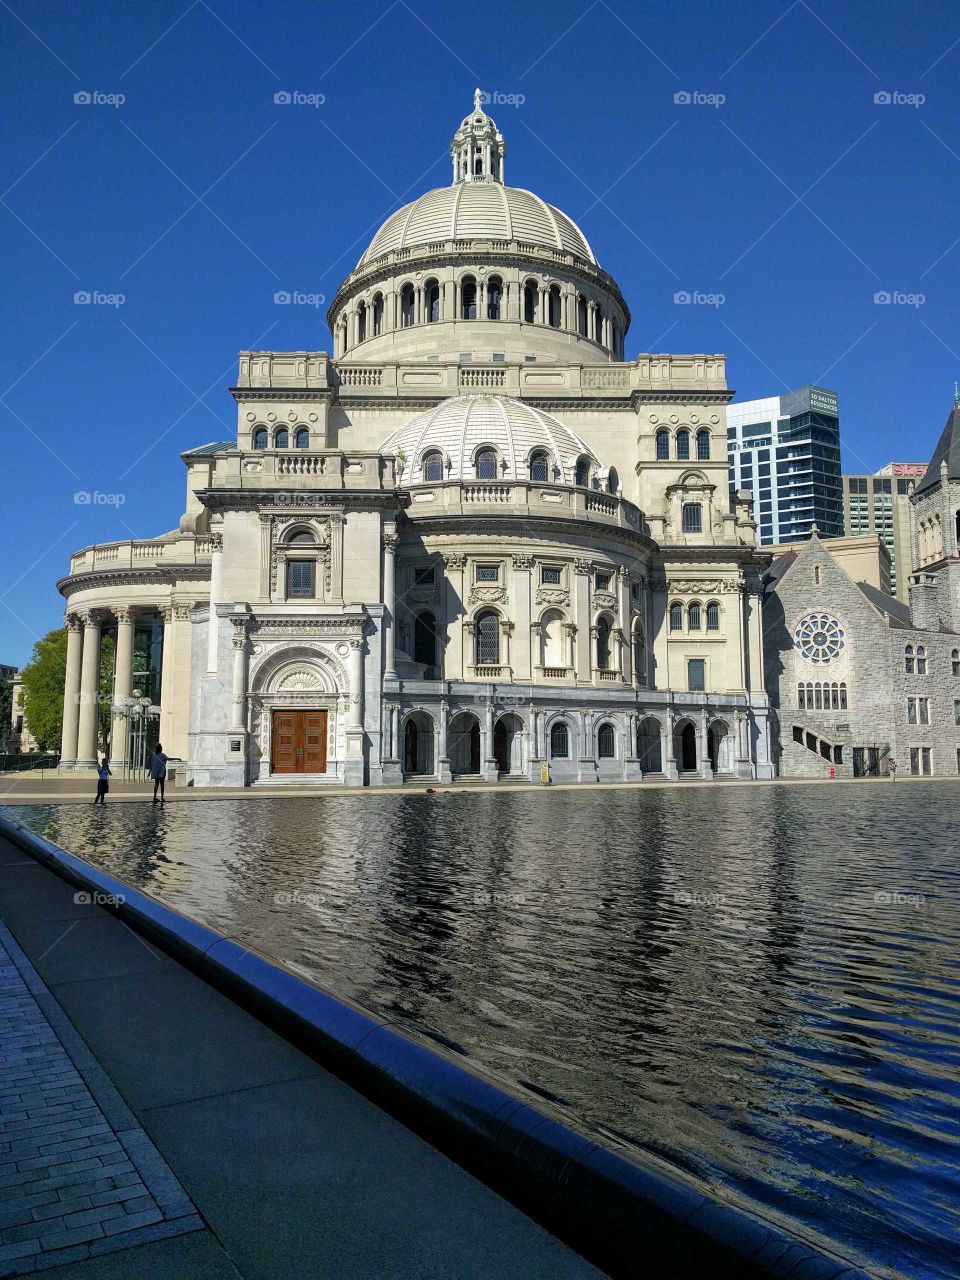 Reflecting pool at the Christian science center